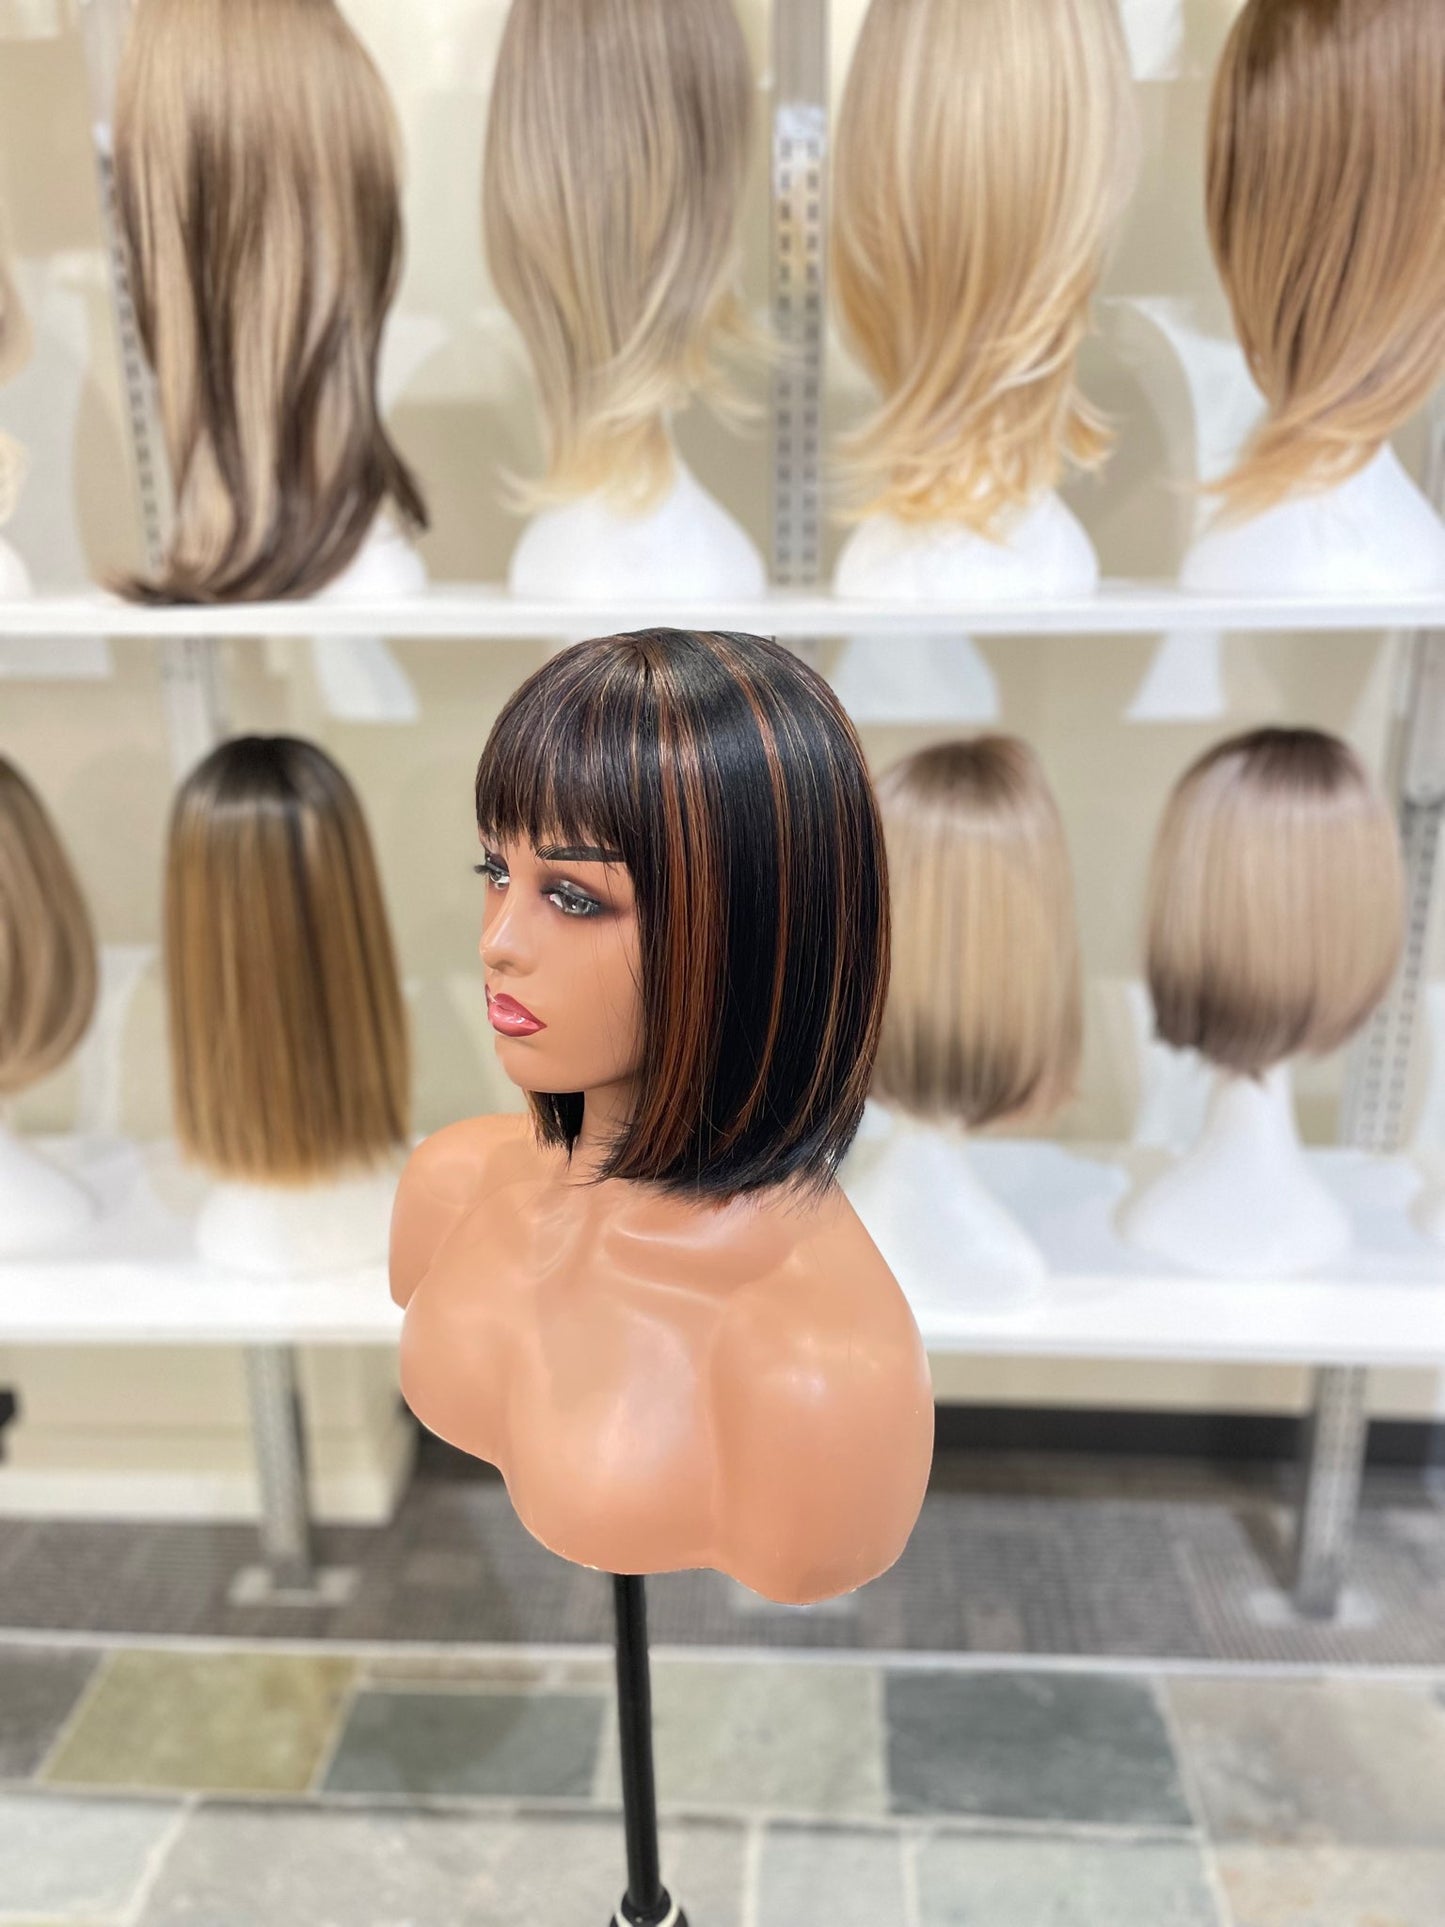 Aisha - Straight Bob Style Black With Brown Highlights Full Head Wig With Bangs